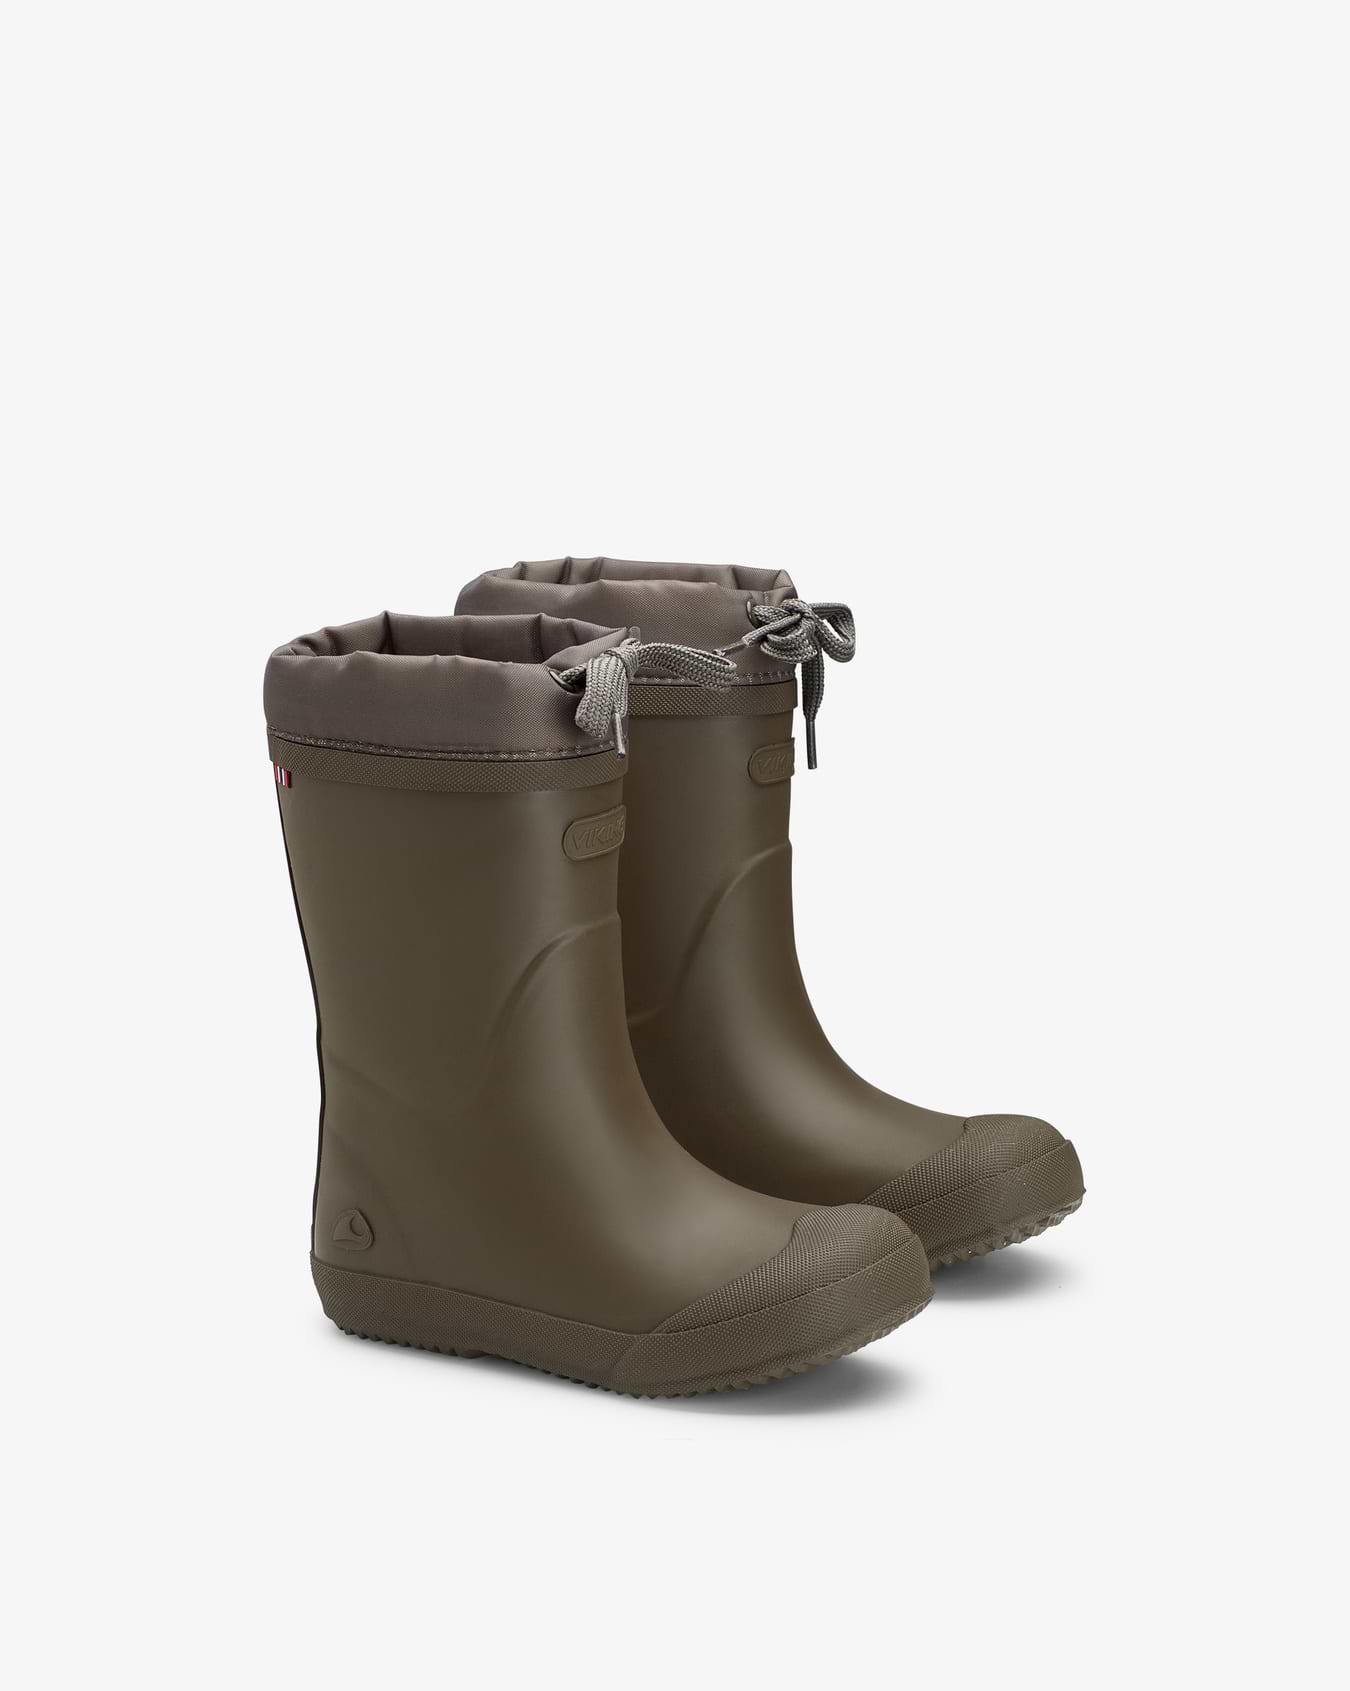 Indie Warm Olive Rubber Boot